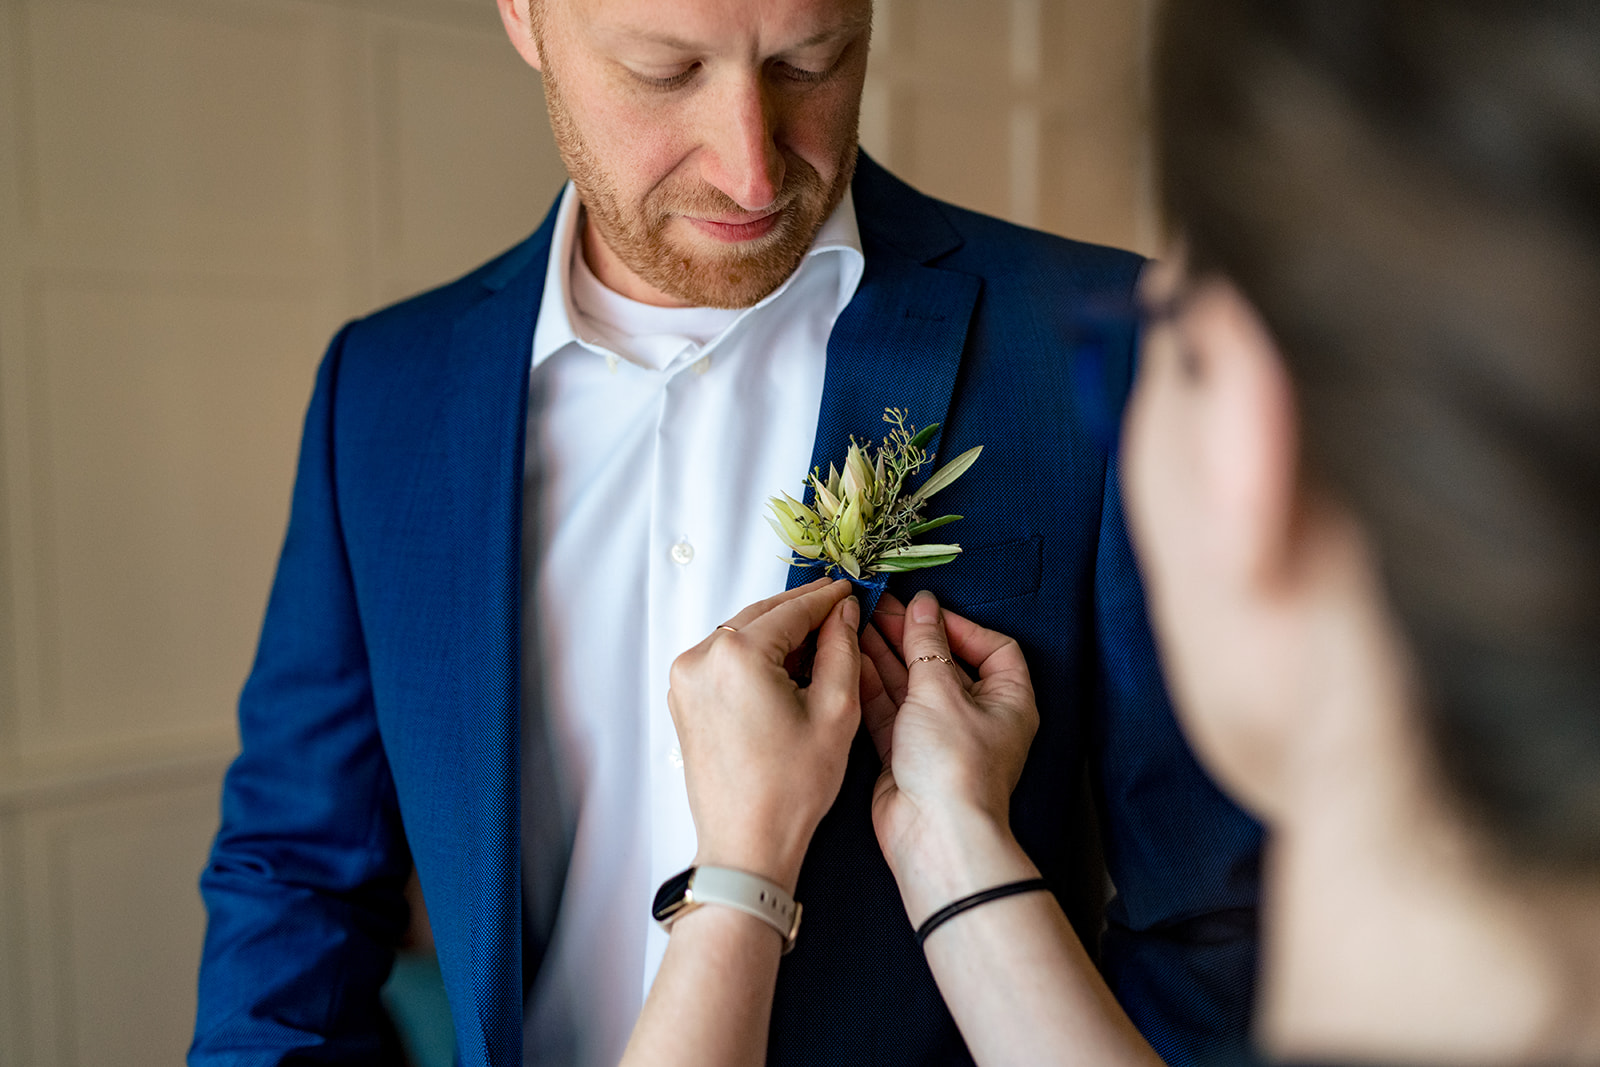 groom getting boutonniere pinned on jacket